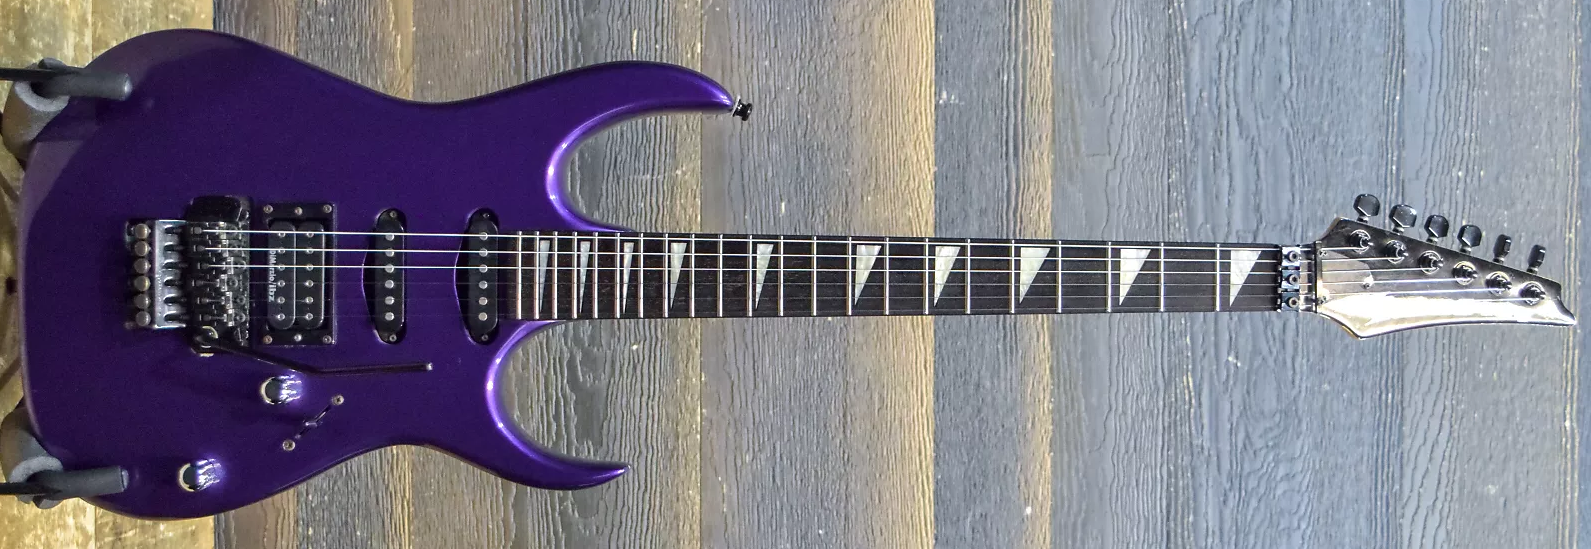 ibanez ex 360 review